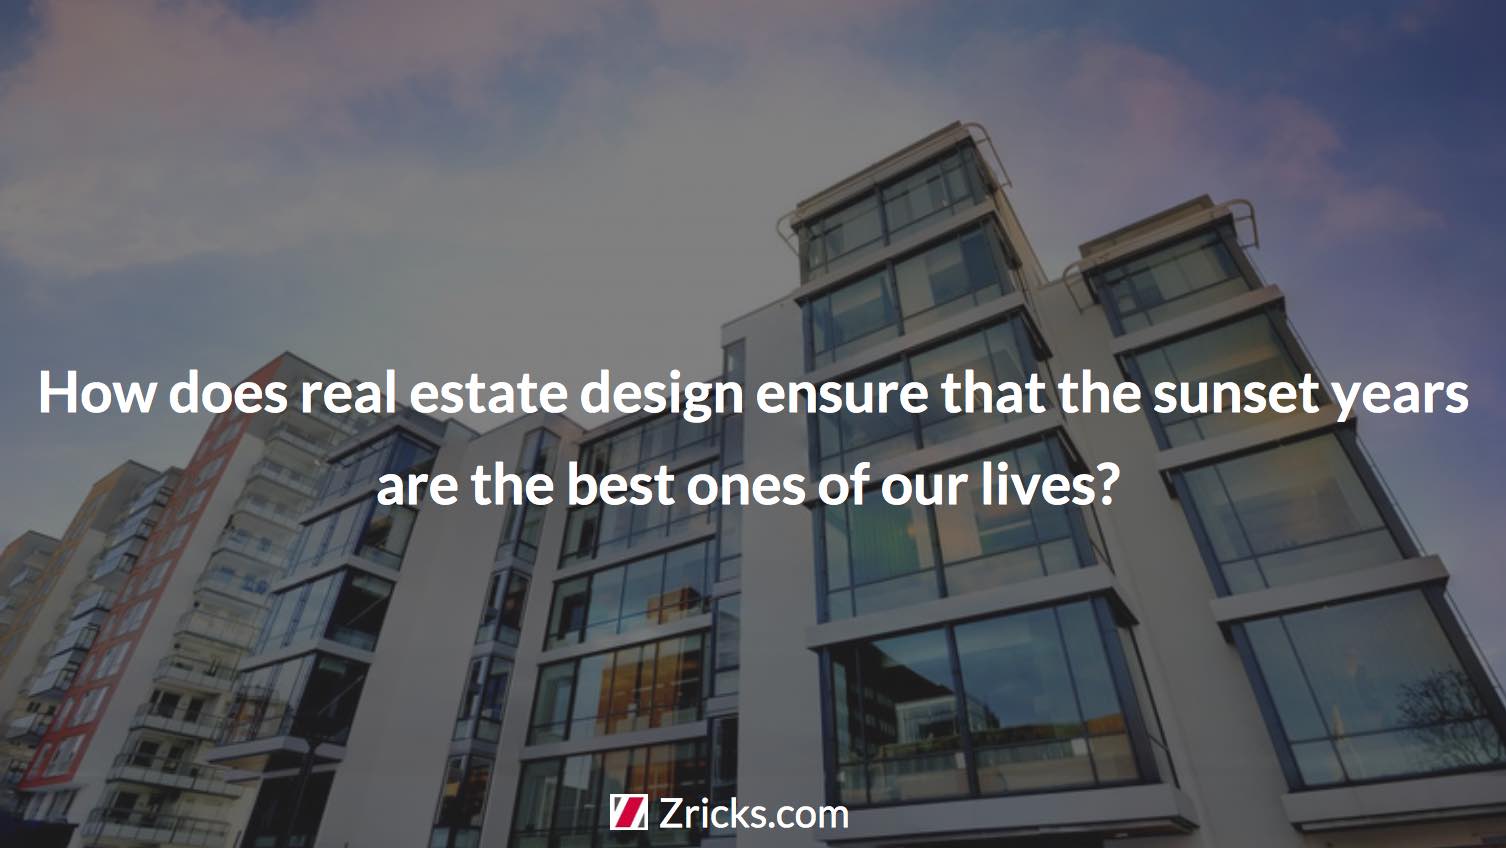 How does real estate design ensure that the sunset years are the best ones of our lives? Update